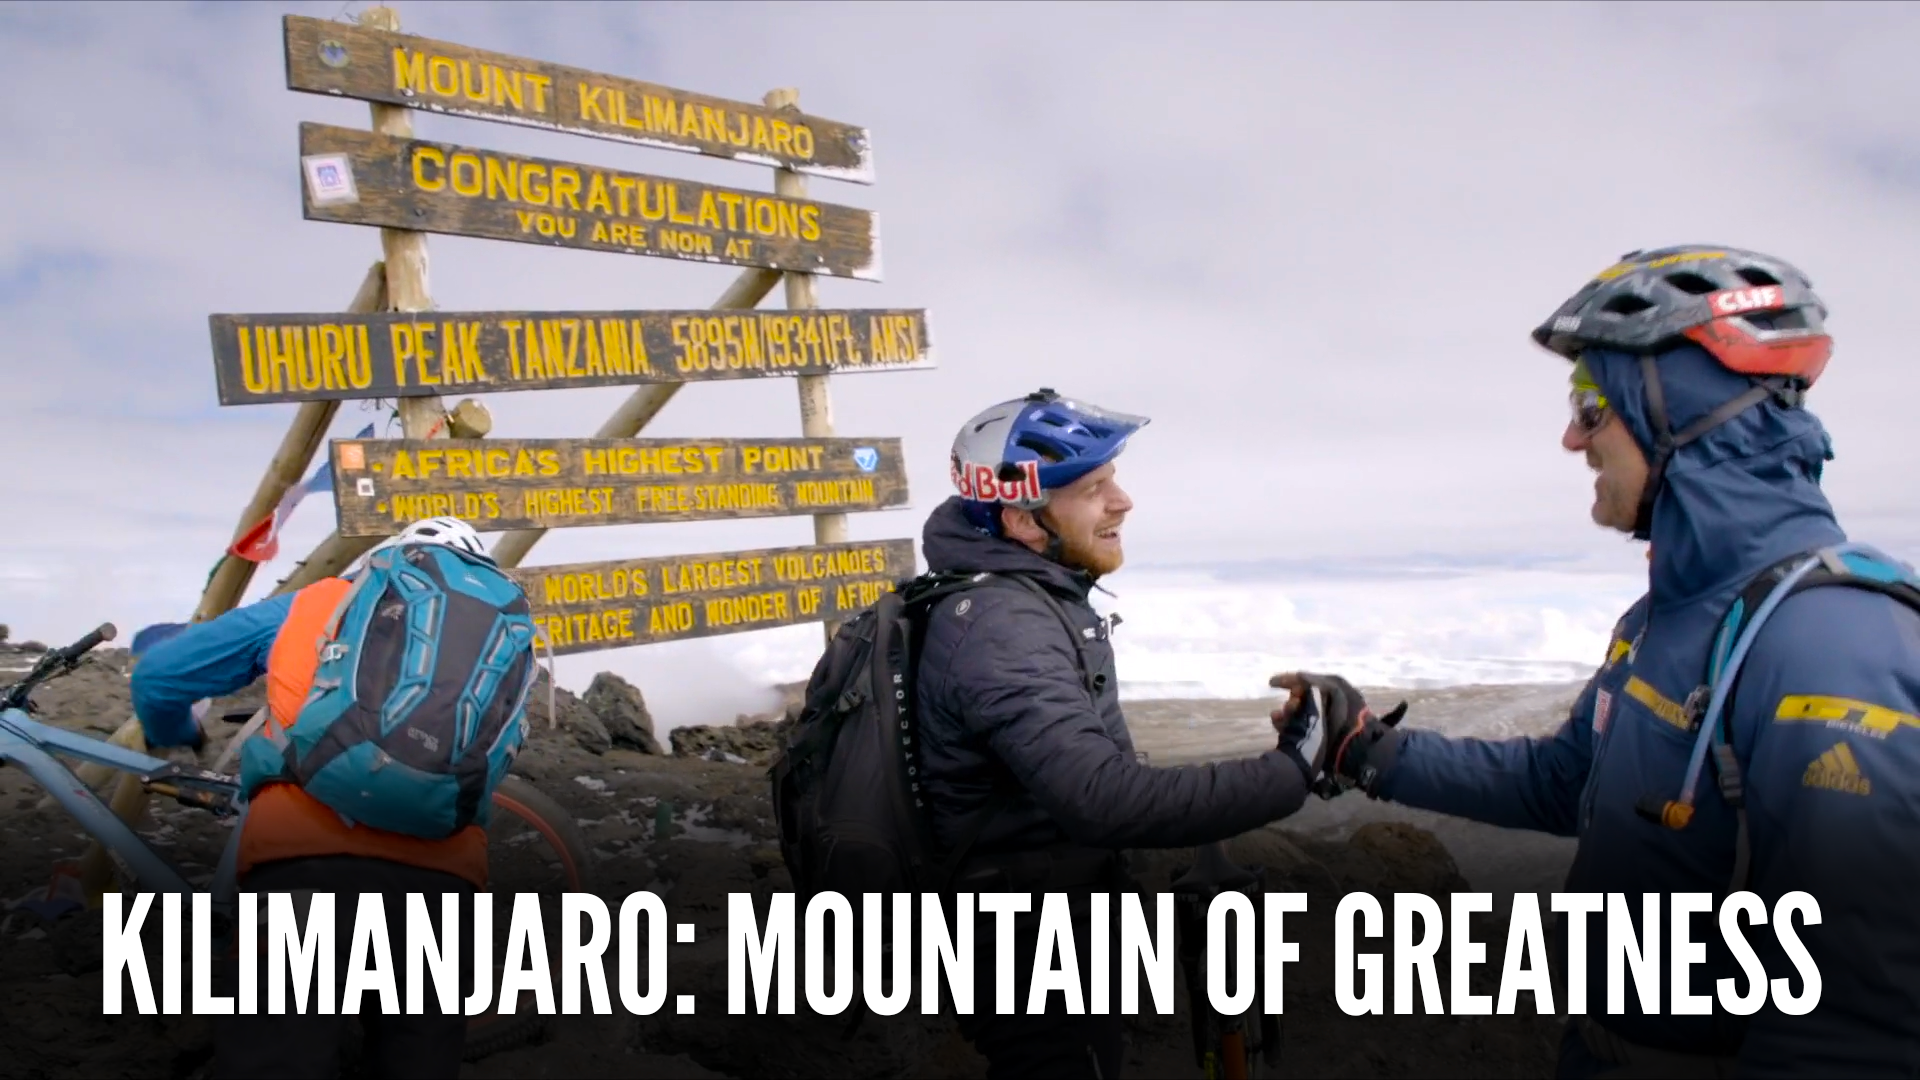 Danny MacAskill and Hans Rey conquer Mount Kilimanjaro – by bike